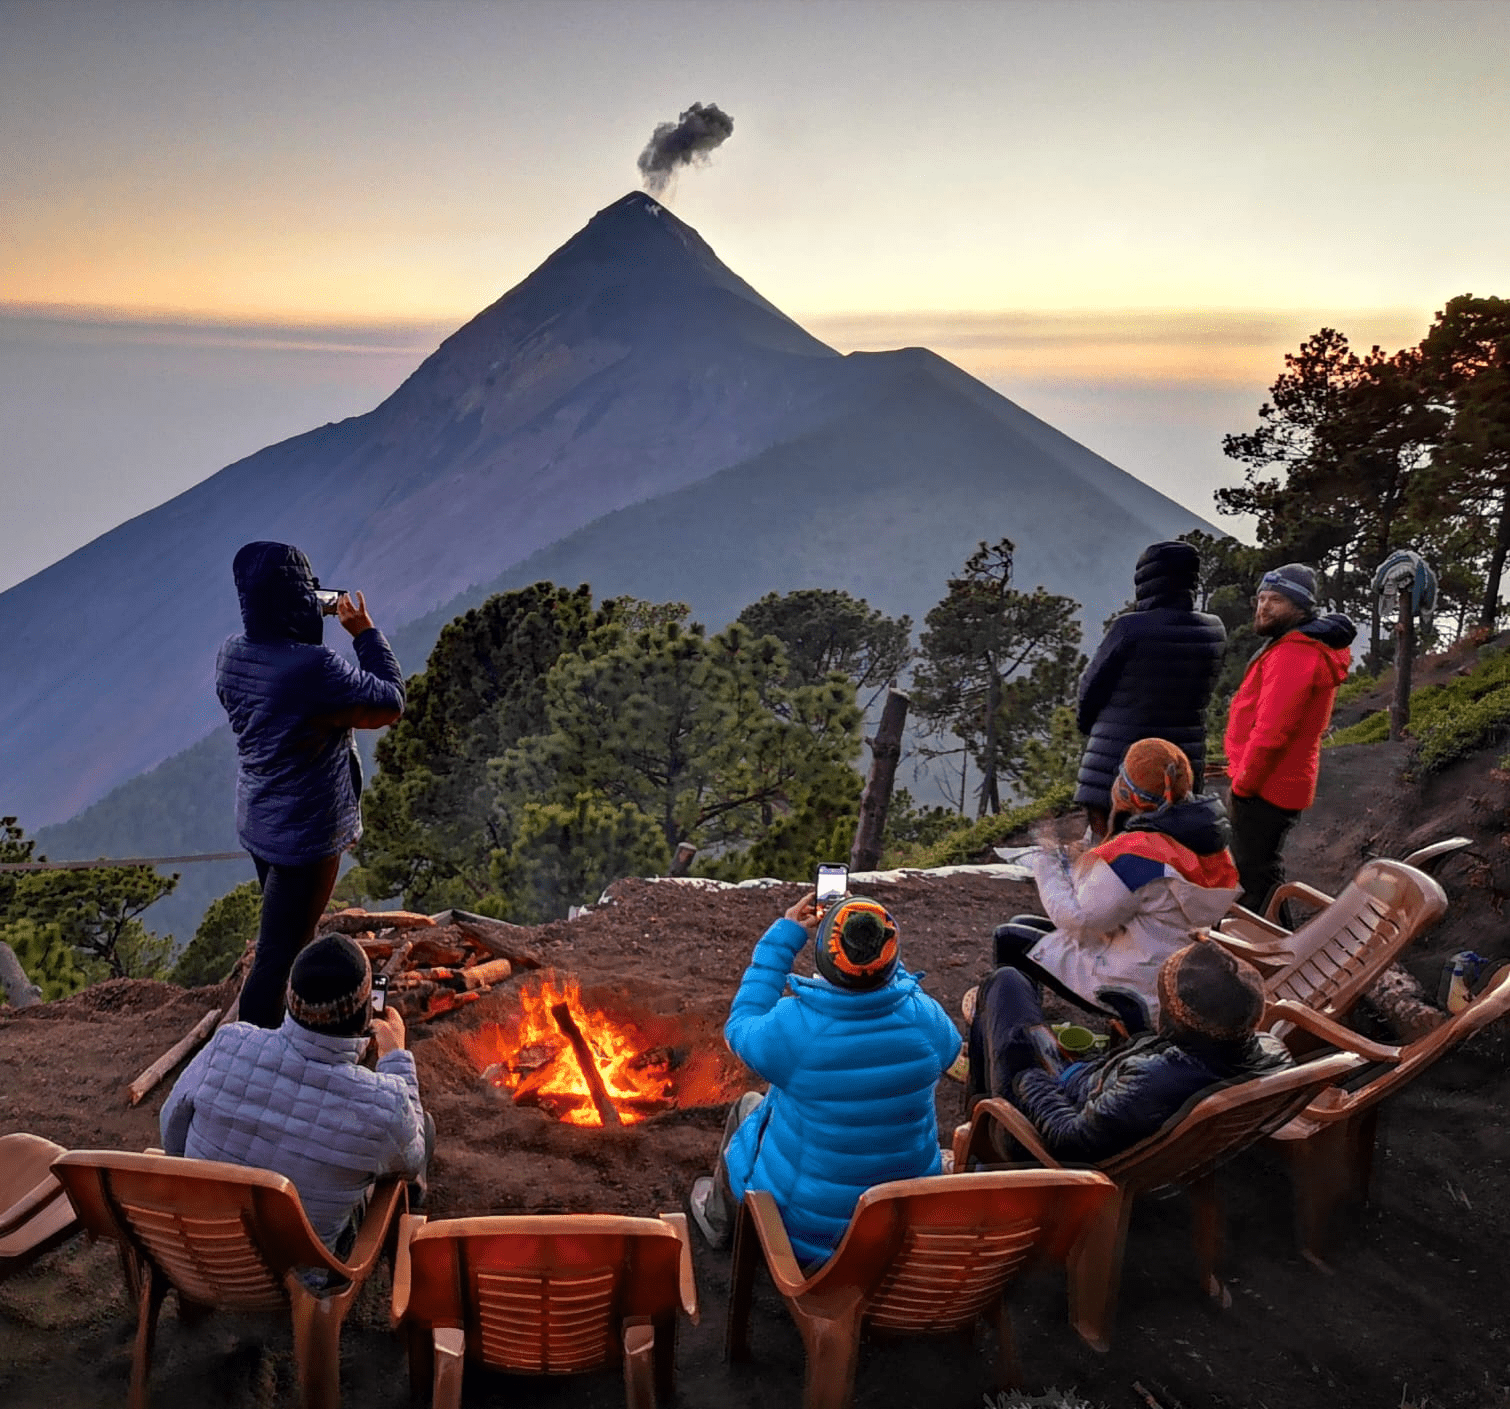 Watching sunrise and volcano Fuego erupt from the campsite.